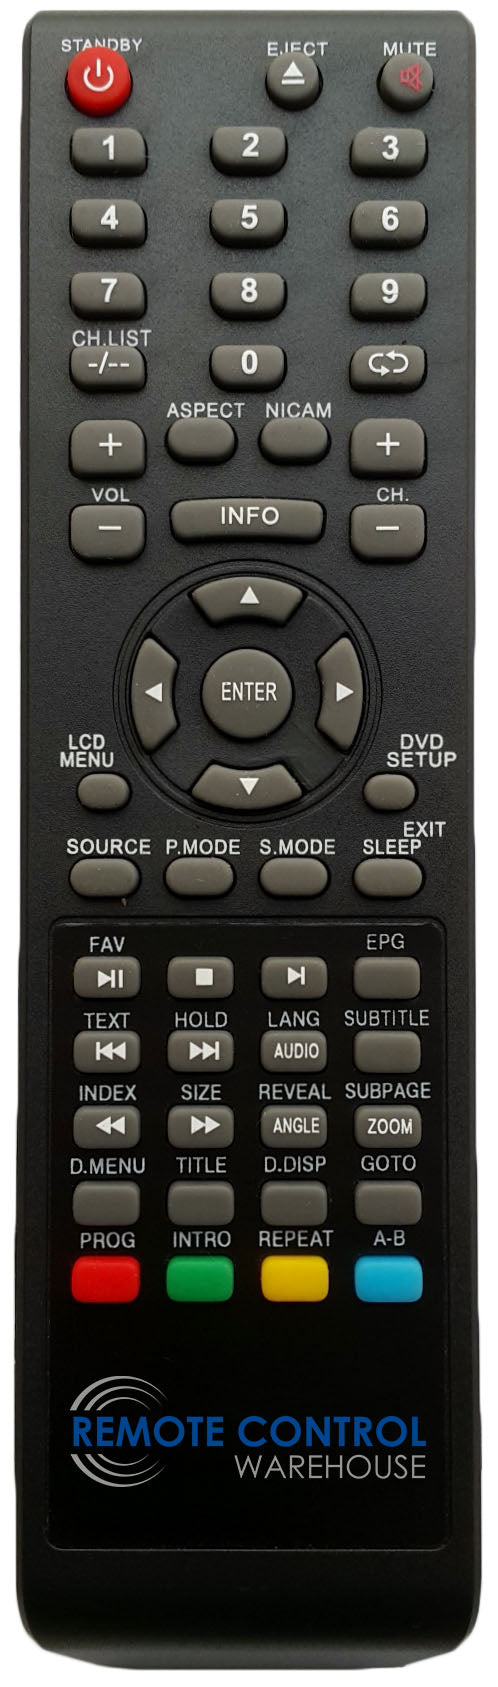 GRUNDIG REPLACEMENT REMOTE CONTROL - GLCD3206HDV LCD TV - Remote Control Warehouse